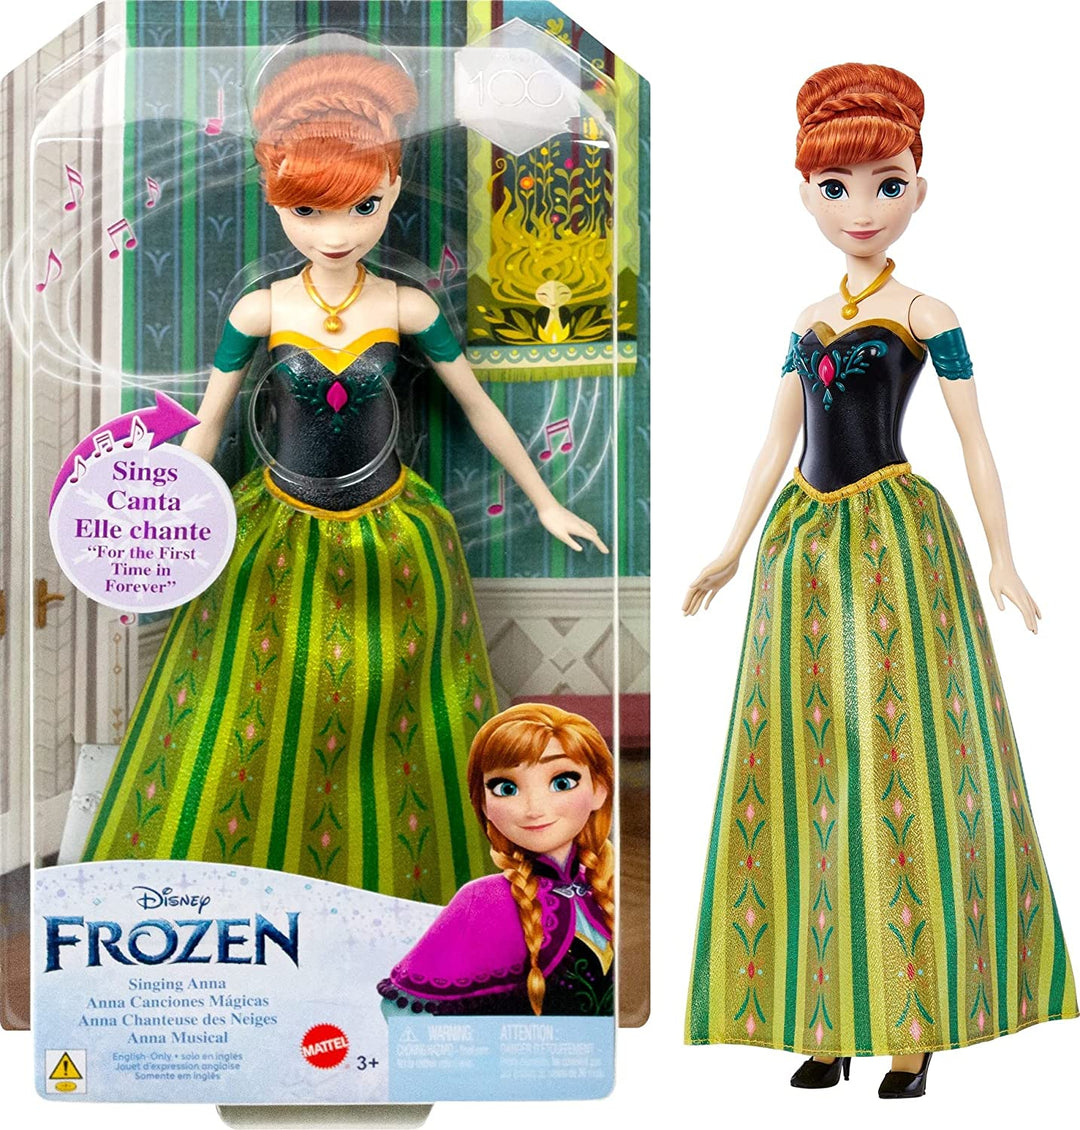 Disney Frozen Toys, Singing Anna Doll in Signature Clothing, Sings “For the First Time in Forever